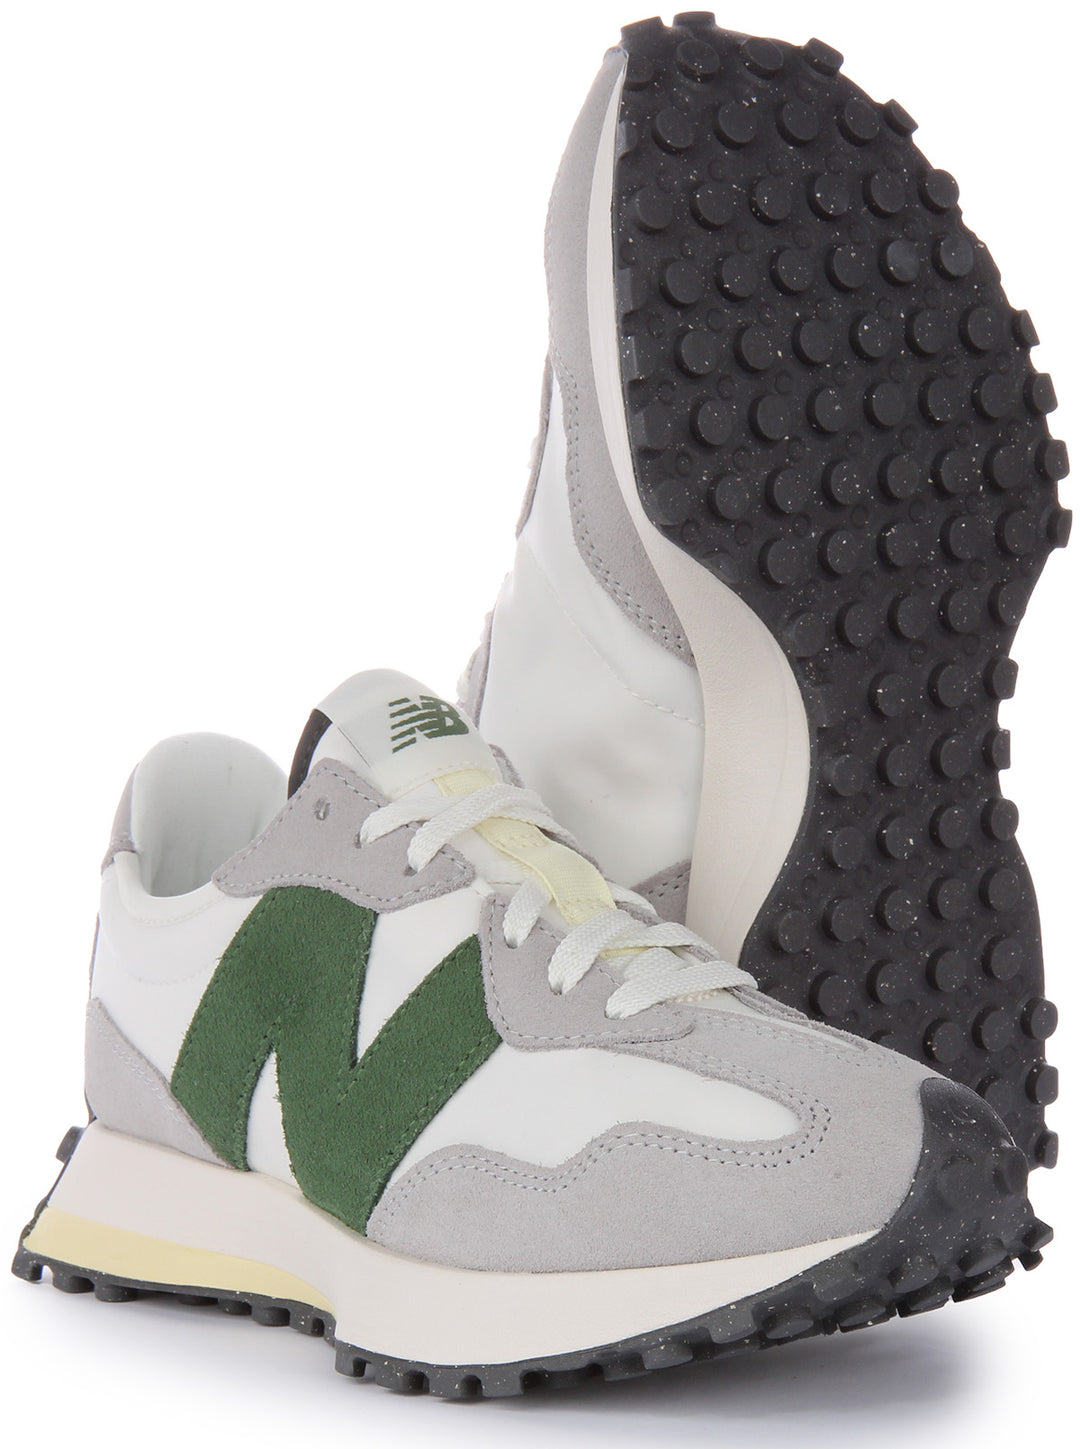 New Balance WS327 PU In White Green For Women